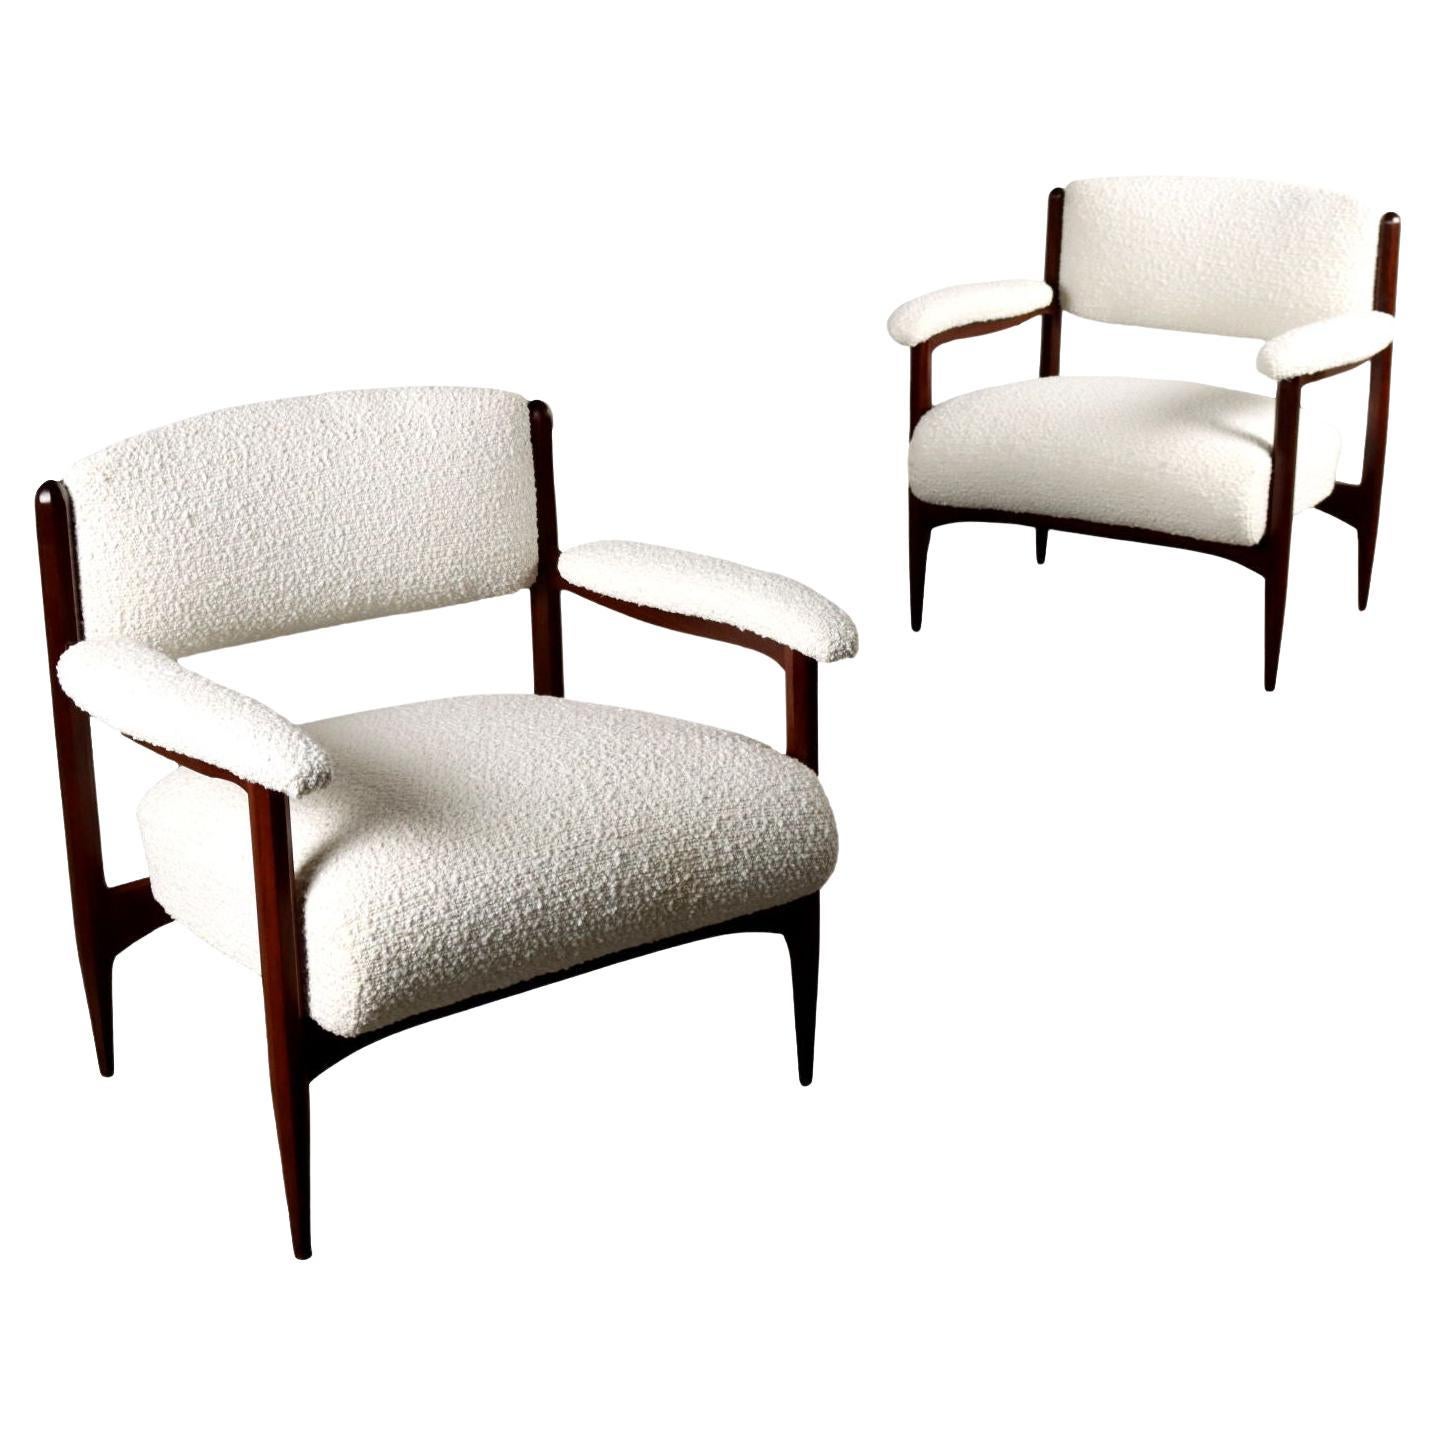 1960s armchairs with wooden arms, restored, white For Sale